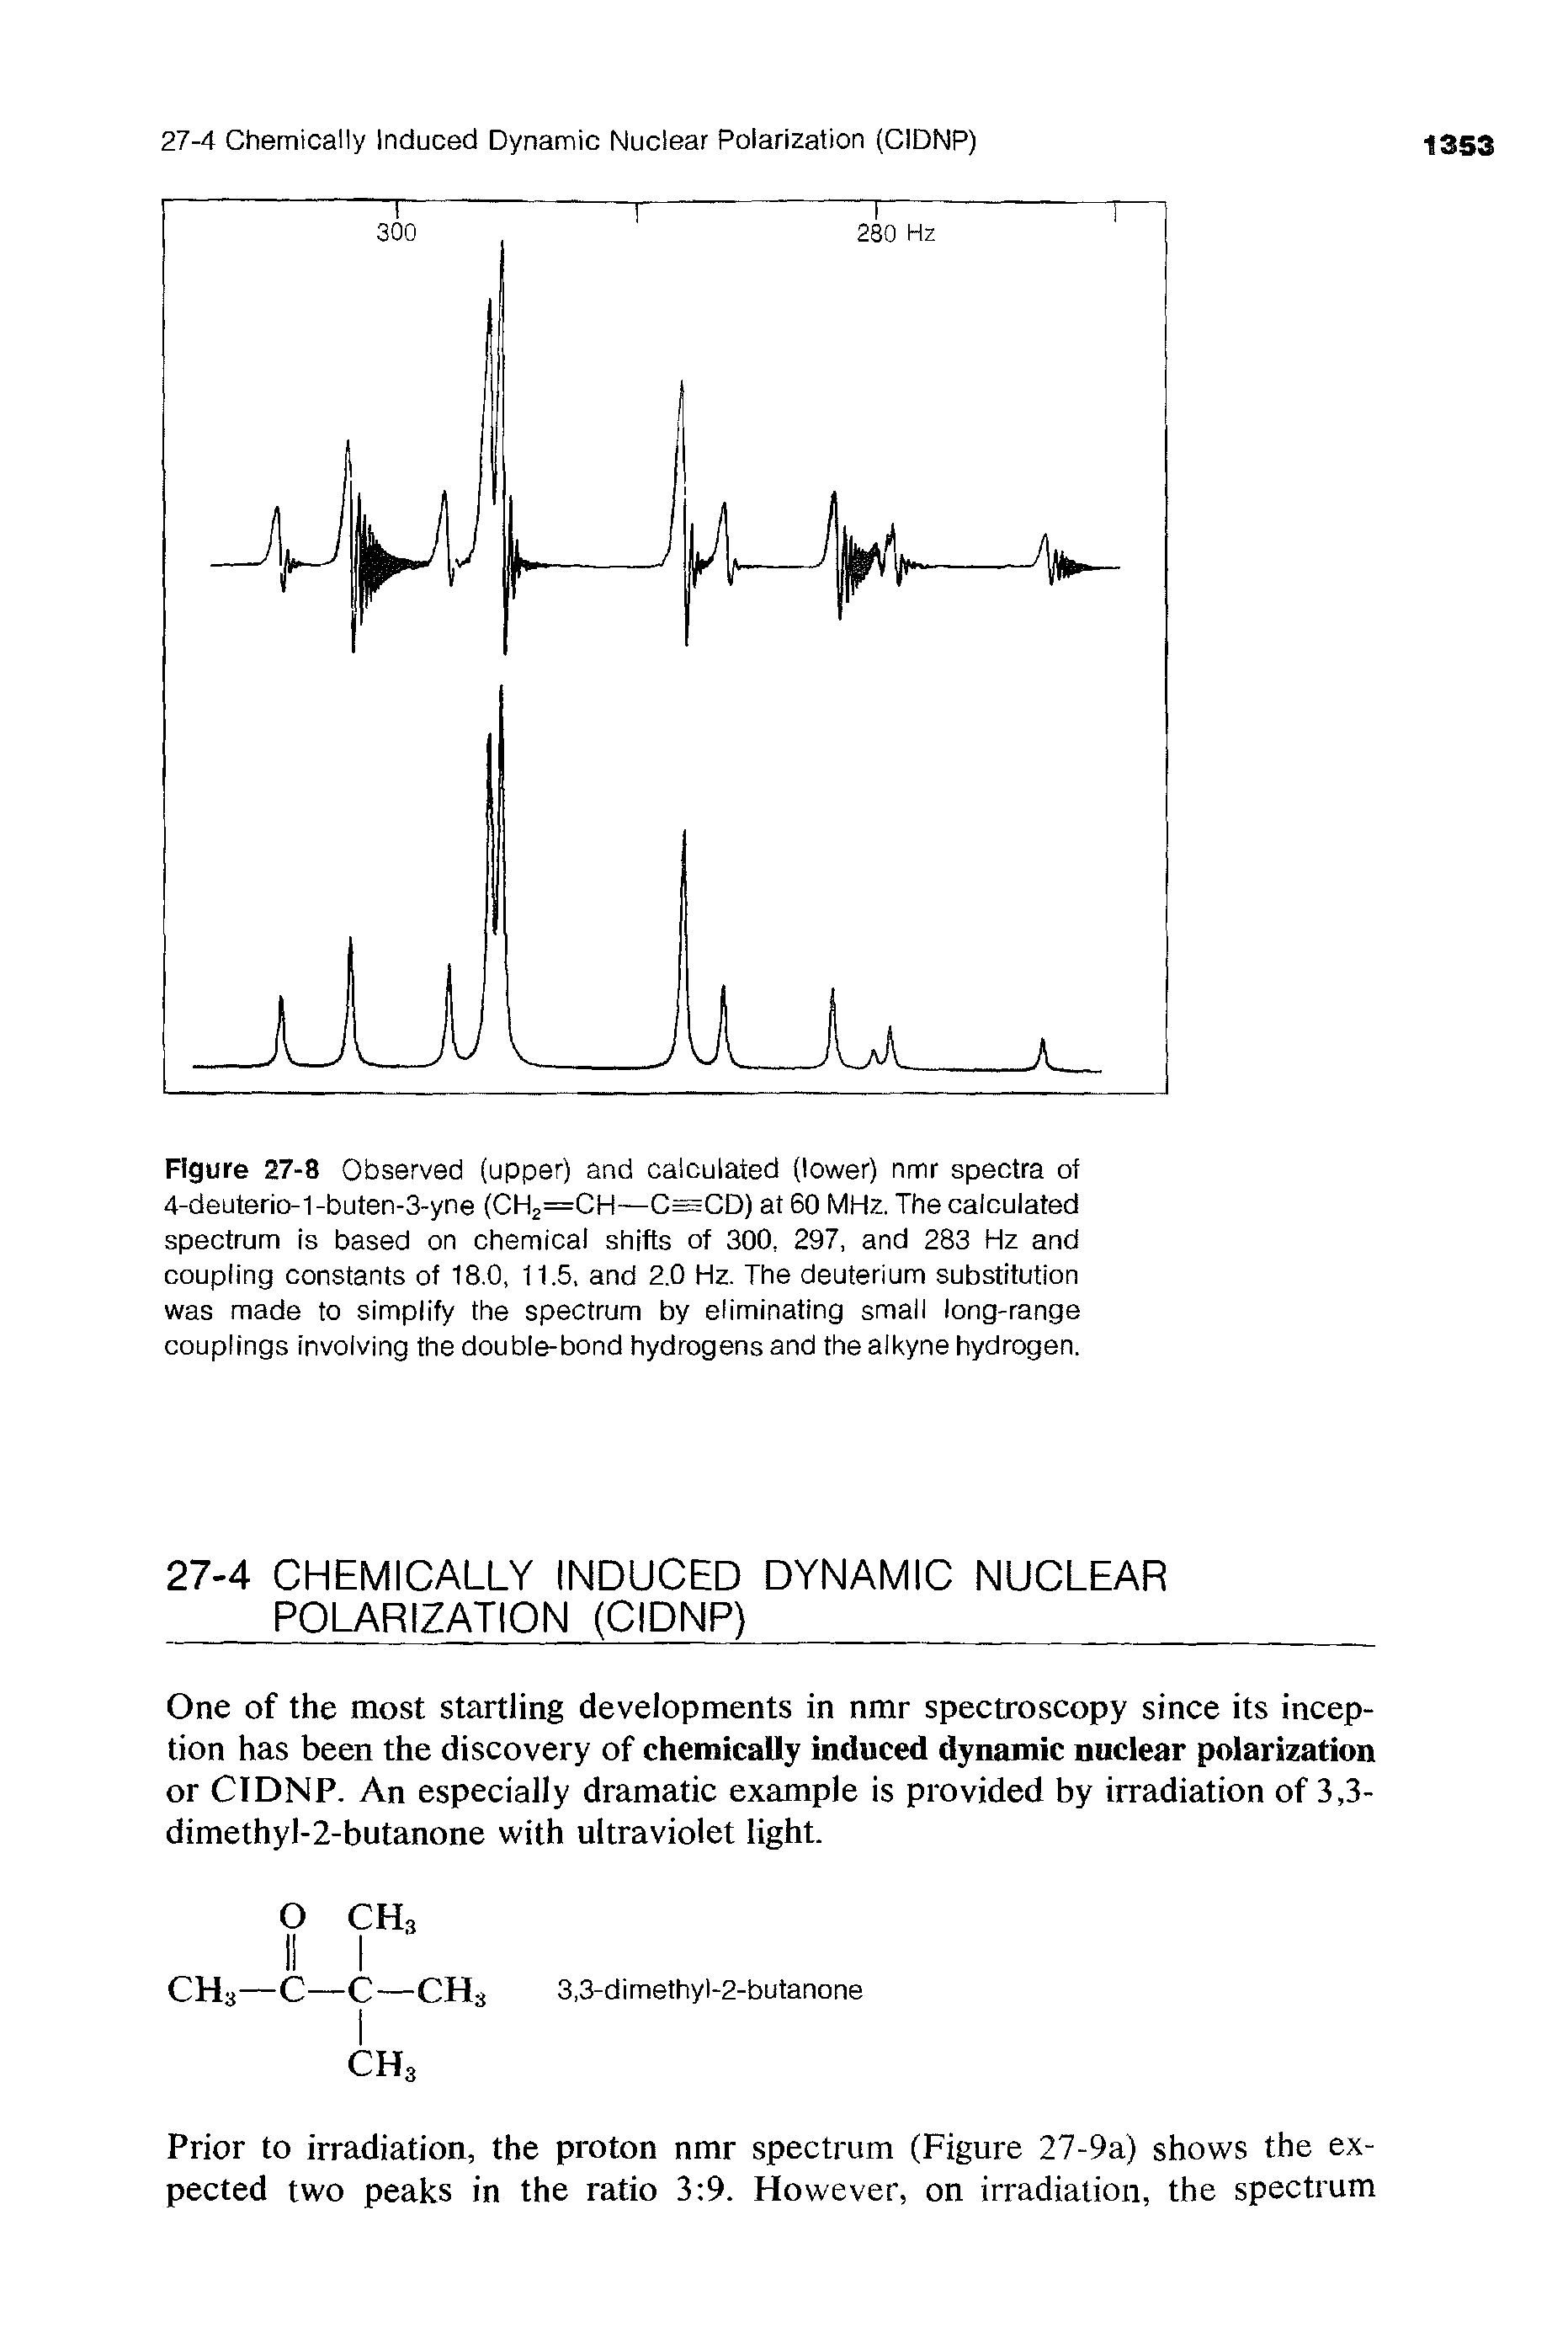 Figure 27-8 Observed (upper) and calculated (lower) nmr spectra of 4-deuterio-1-buten-3-yne (CH2=CH—C=CD) at 60 MHz. The calculated spectrum is based on chemical shifts of 300, 297, and 283 Hz and coupling constants of 18.0, 11.5, and 2.0 Hz. The deuterium substitution was made to simplify the spectrum by eliminating small long-range couplings involving the double-bond hydrogens and the alkyne hydrogen.